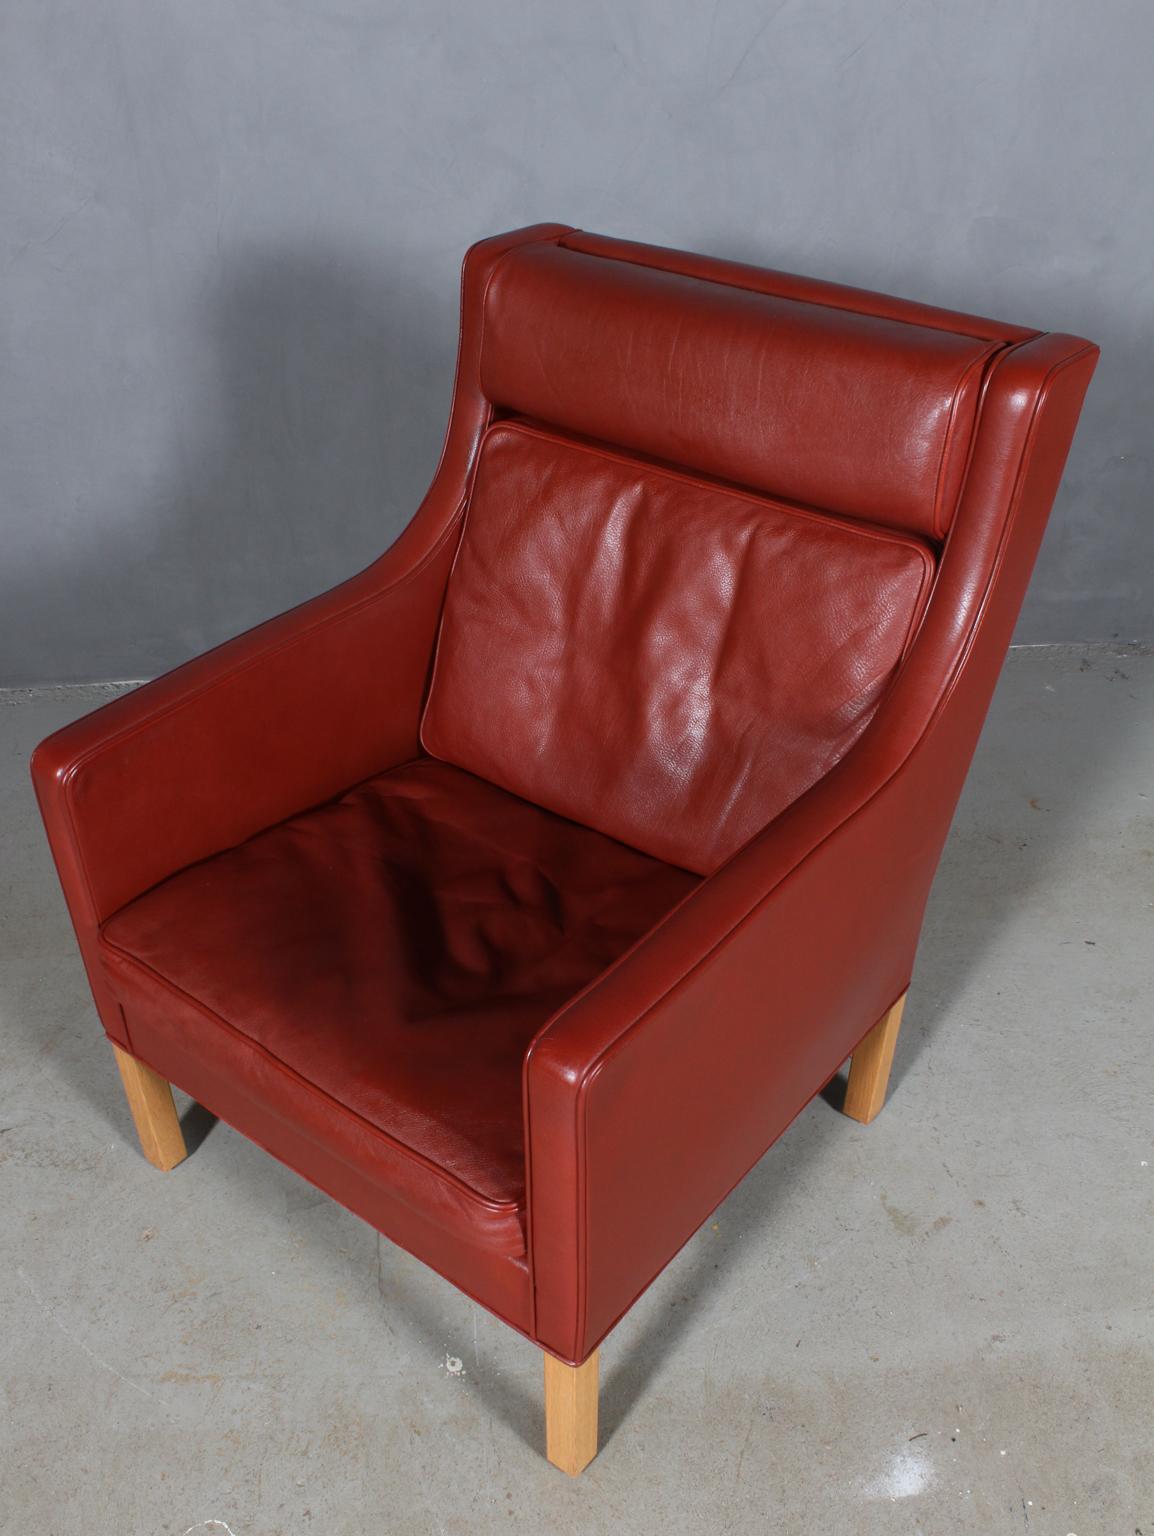 Børge & Peter Mogensen lounge chair in original red / brown leather upholstery. 

Legs in oak.

Model 2431, made by Fredericia furniture.

This is a cooperation between Børge Mogensen and his son Peter Mogensen.